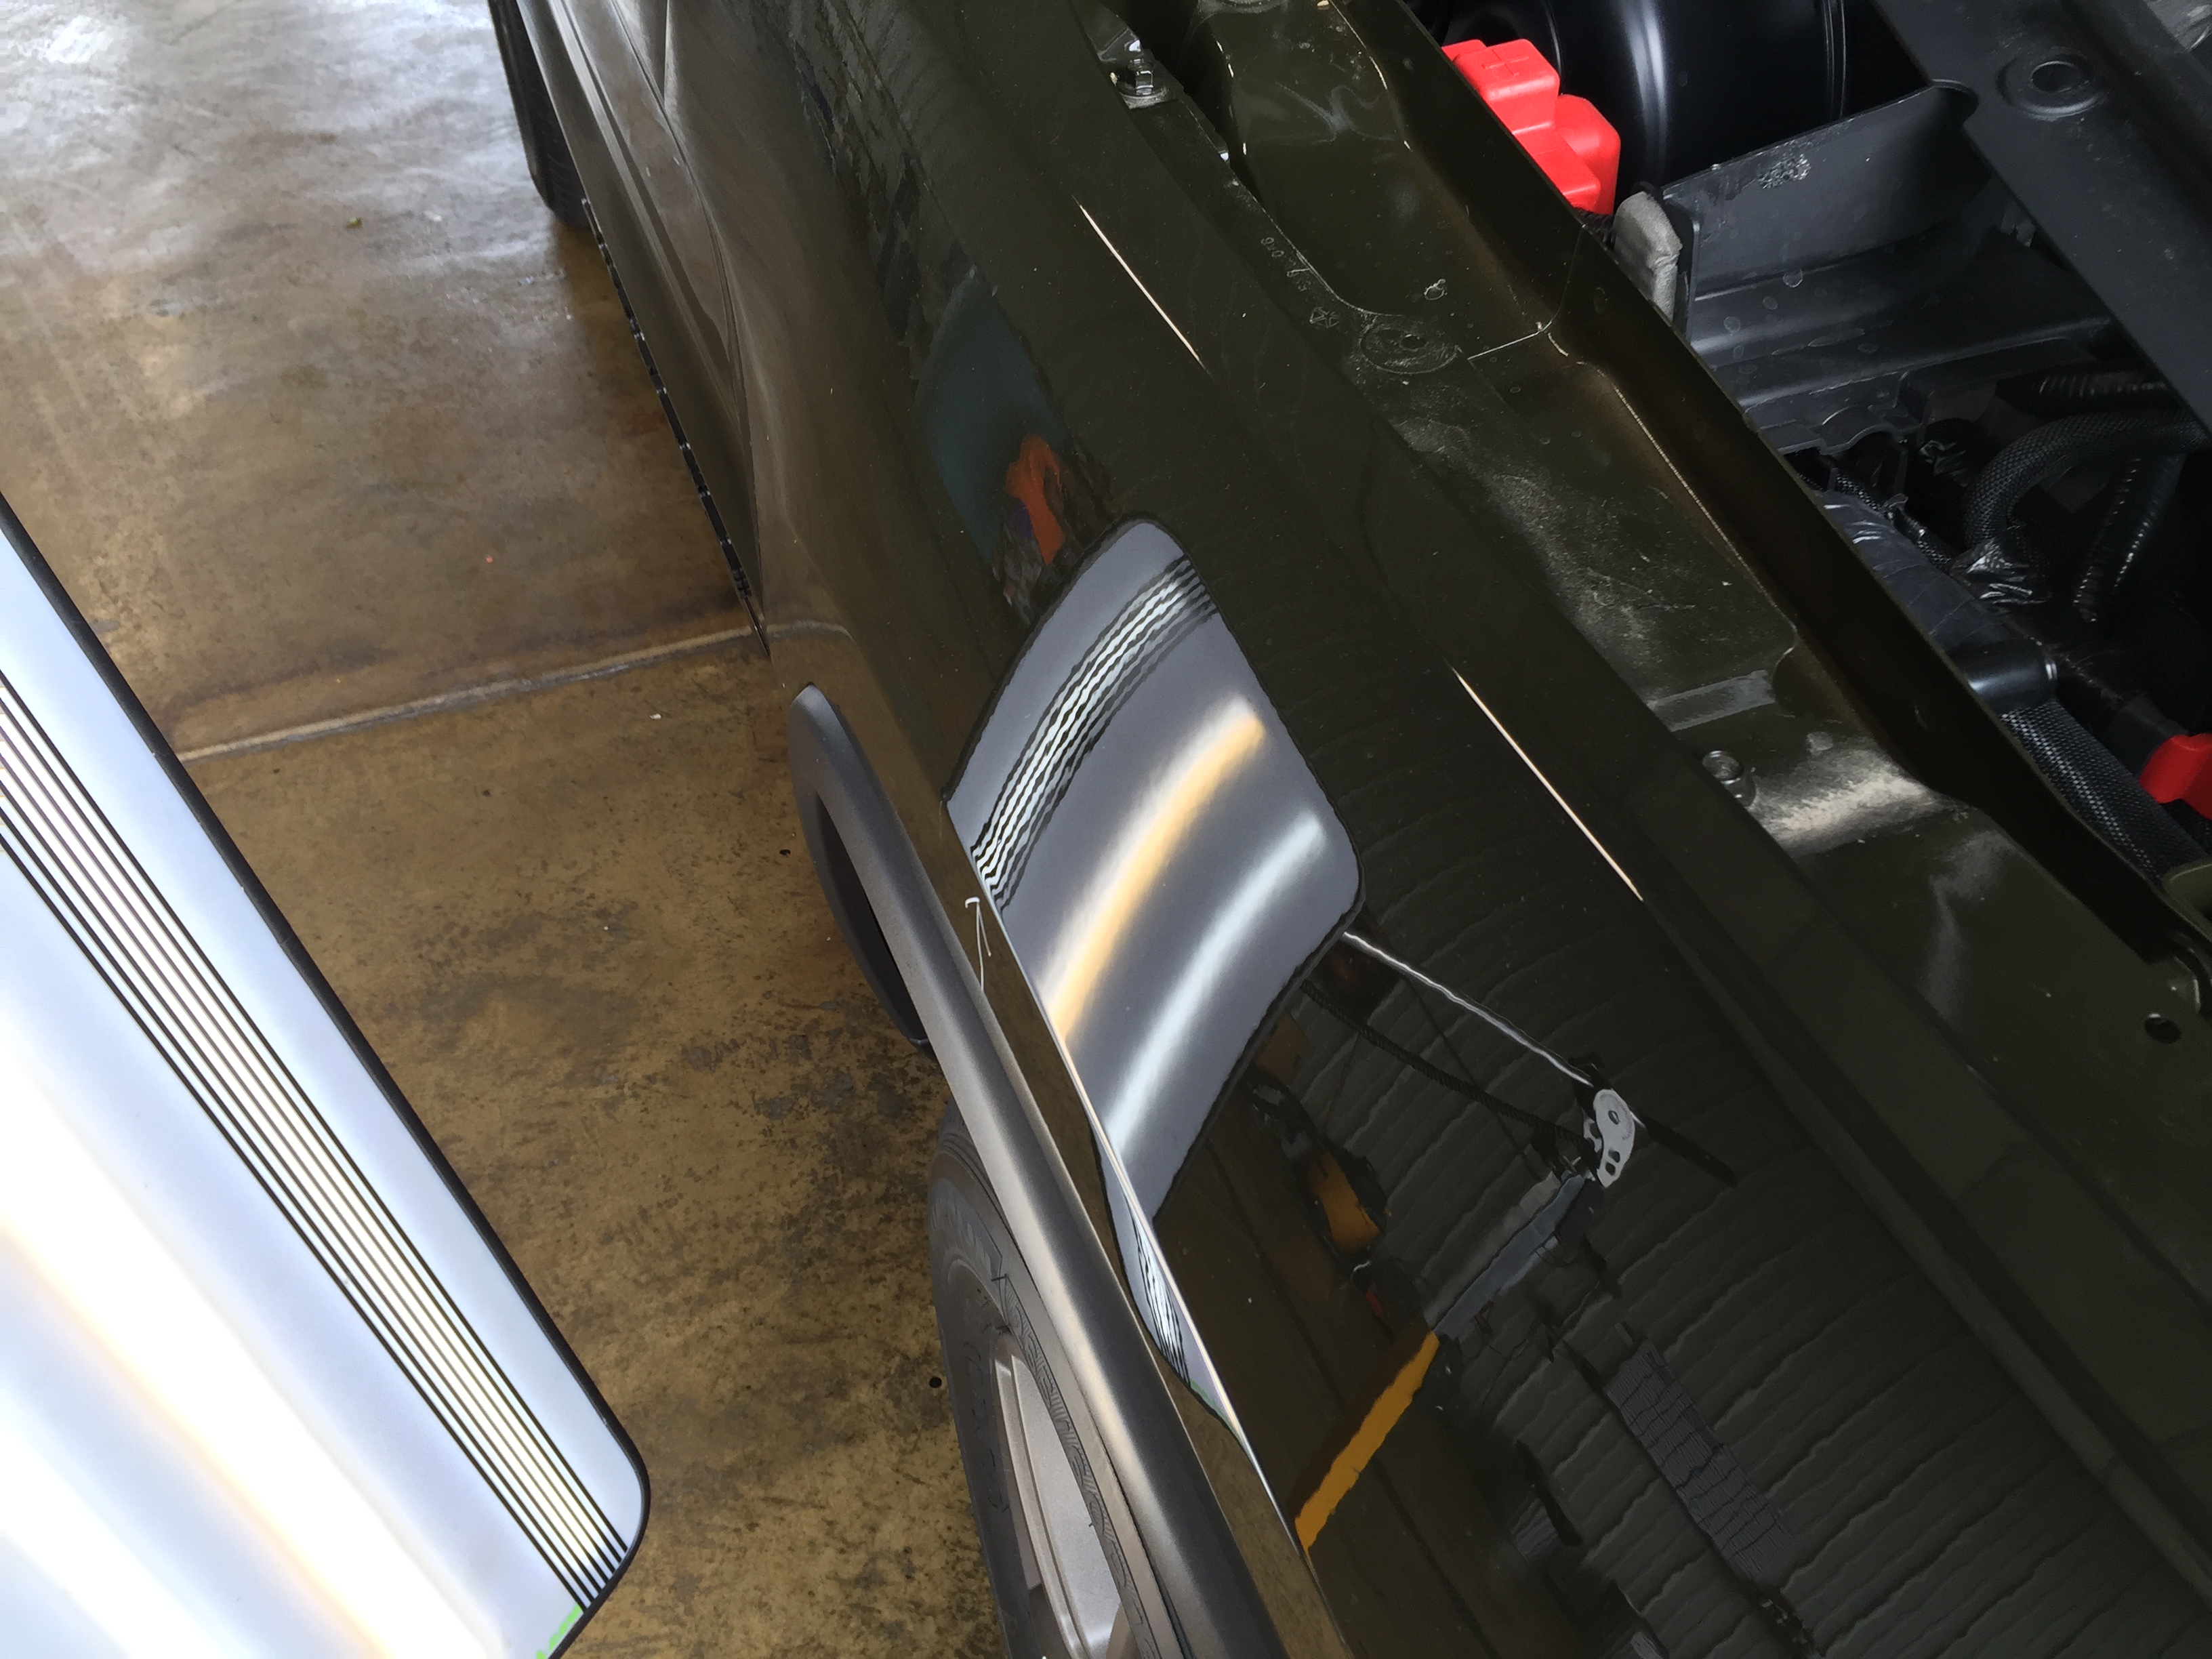 2016 Jeep Grand Cherokee Fender Dent Removed with Paintless Dent Removal, Springfield, IL, https://217dent.com